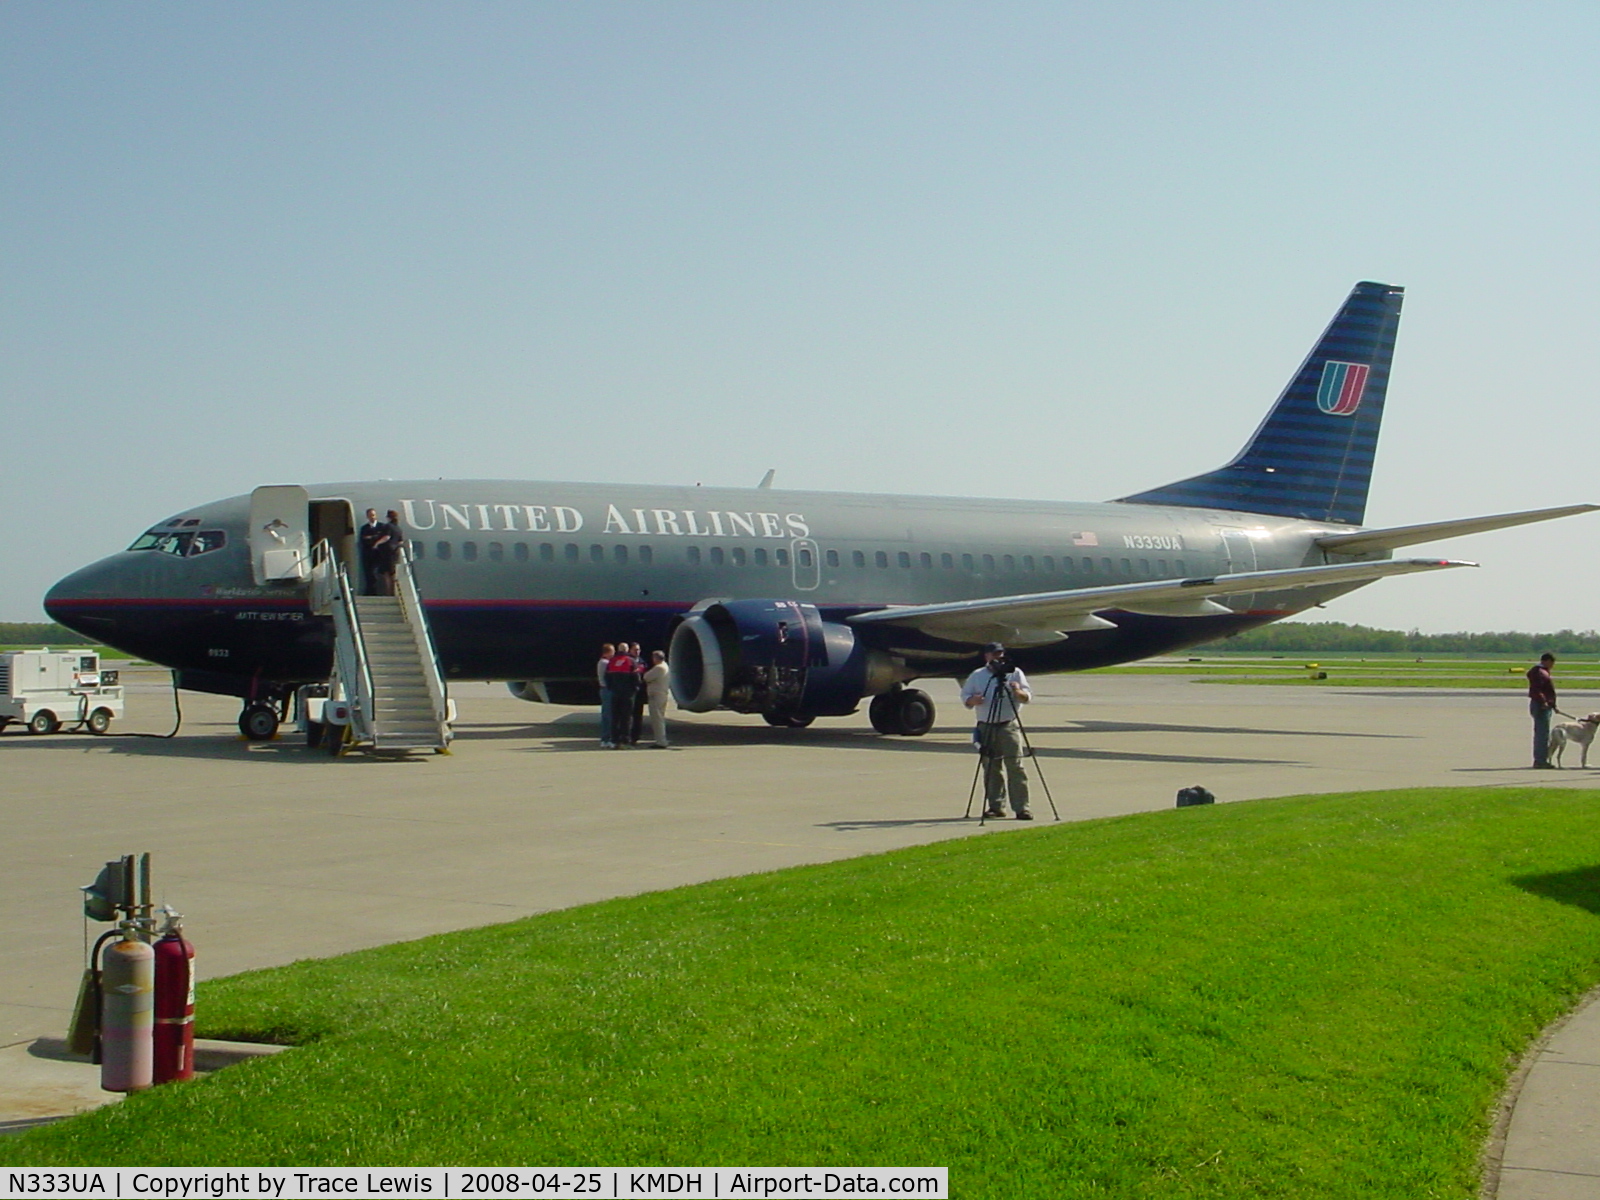 N333UA, 1988 Boeing 737-322 C/N 24228, Aircraft was donated by UAL to fly 102 prospective students to SIU for a career day